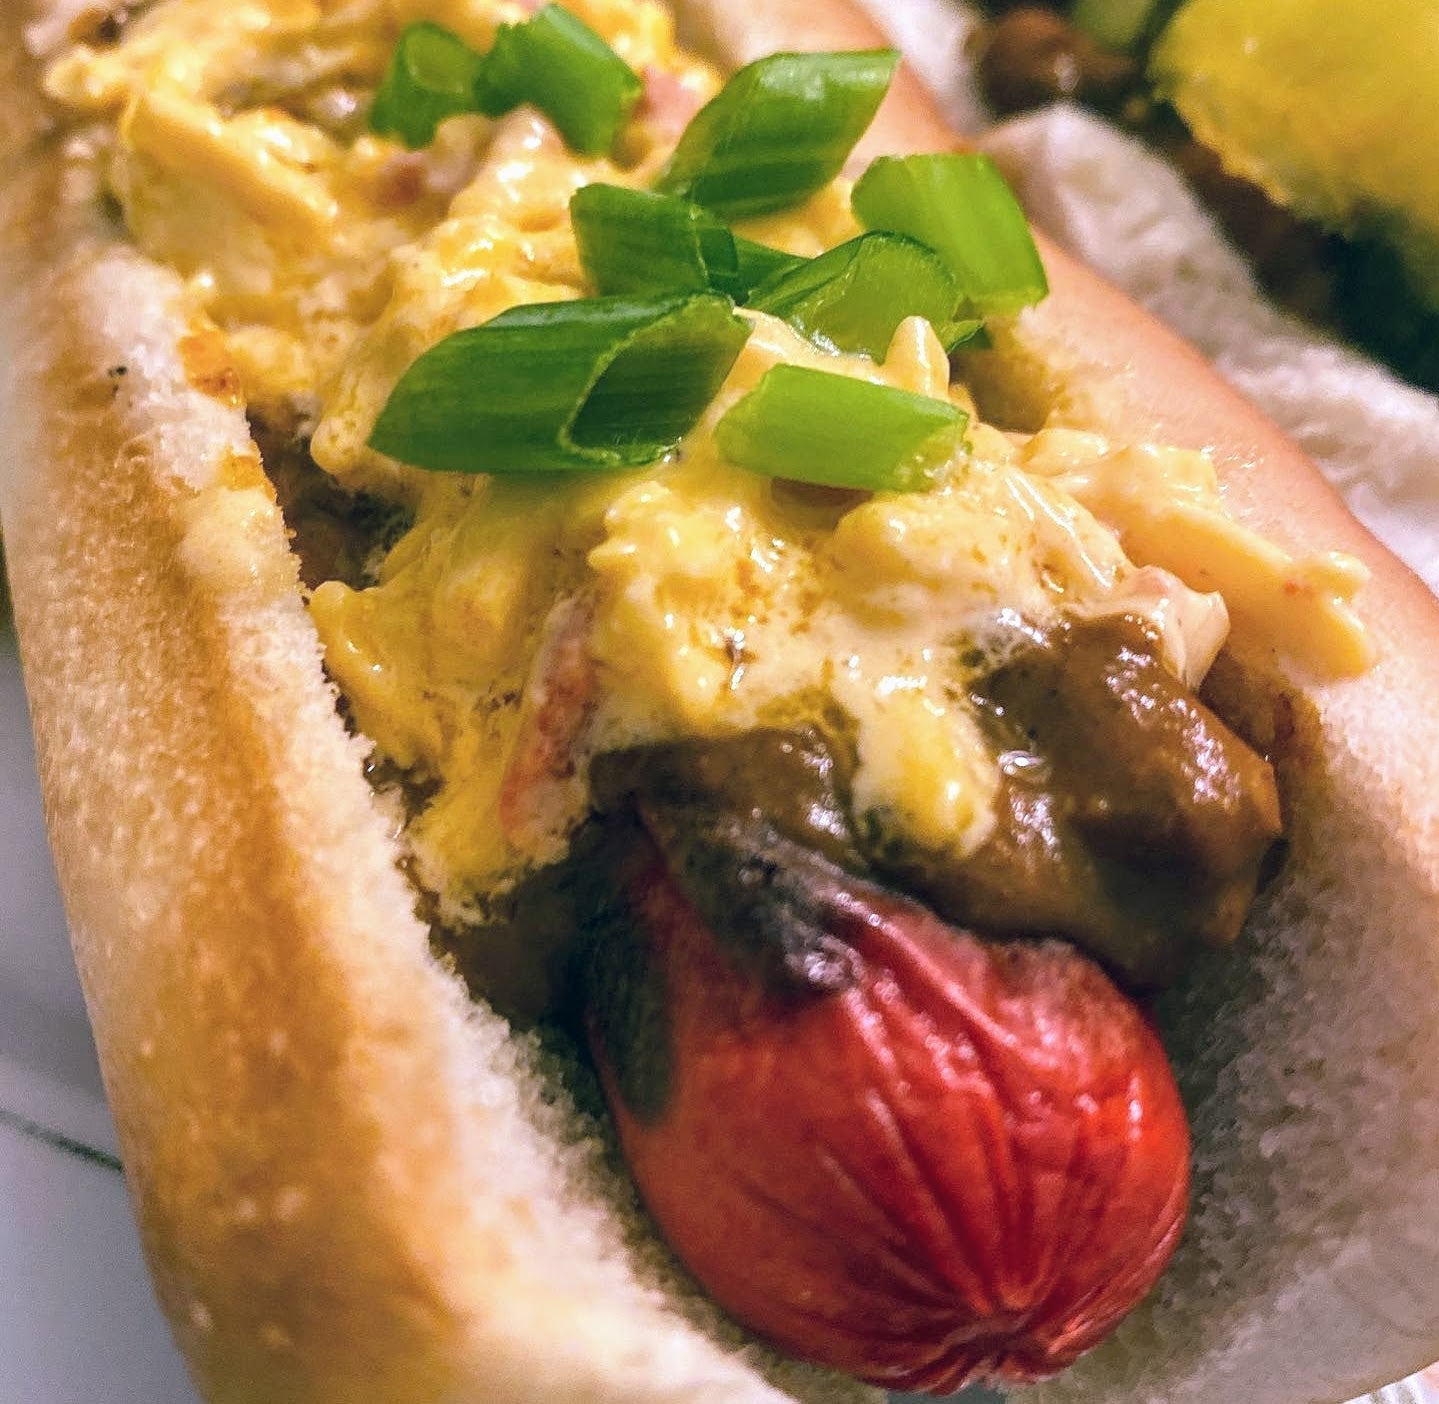 Bright Leaf Hot Dogs with Chili, Pimento Cheese and Green Onions